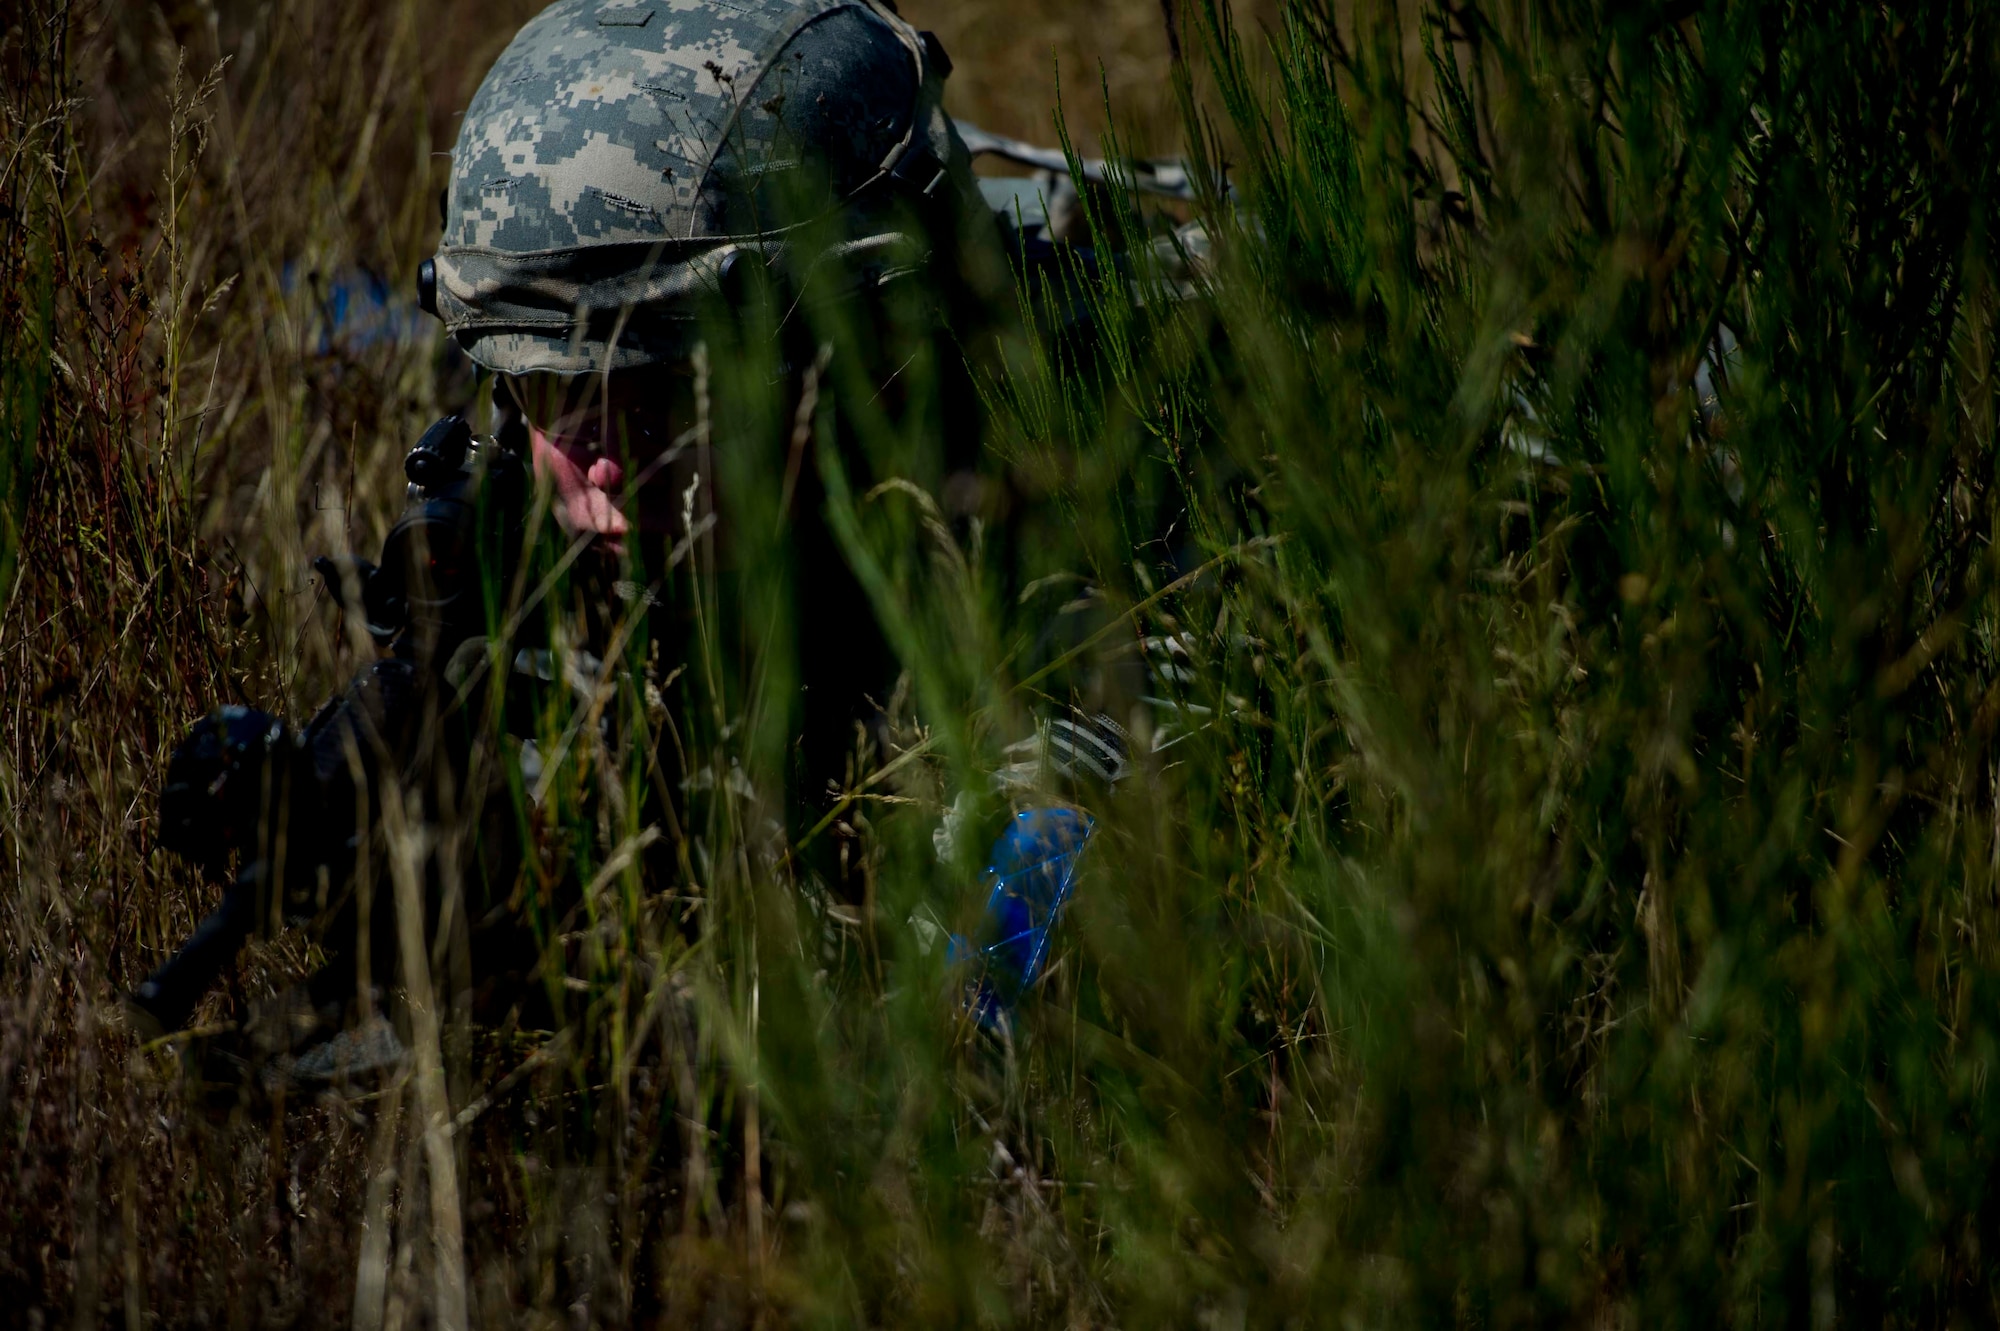 A Citizen Airman from the 446th Security Forces Squadron is in position participating in a large-scale Field Training Exercise at Joint Base Lewis-McChord September 8 - 11th. The exercise challenged SFS members to train in an expeditionary environment. (U.S. Air Force Reserve photo by Staff Sgt. Daniel Liddicoet)